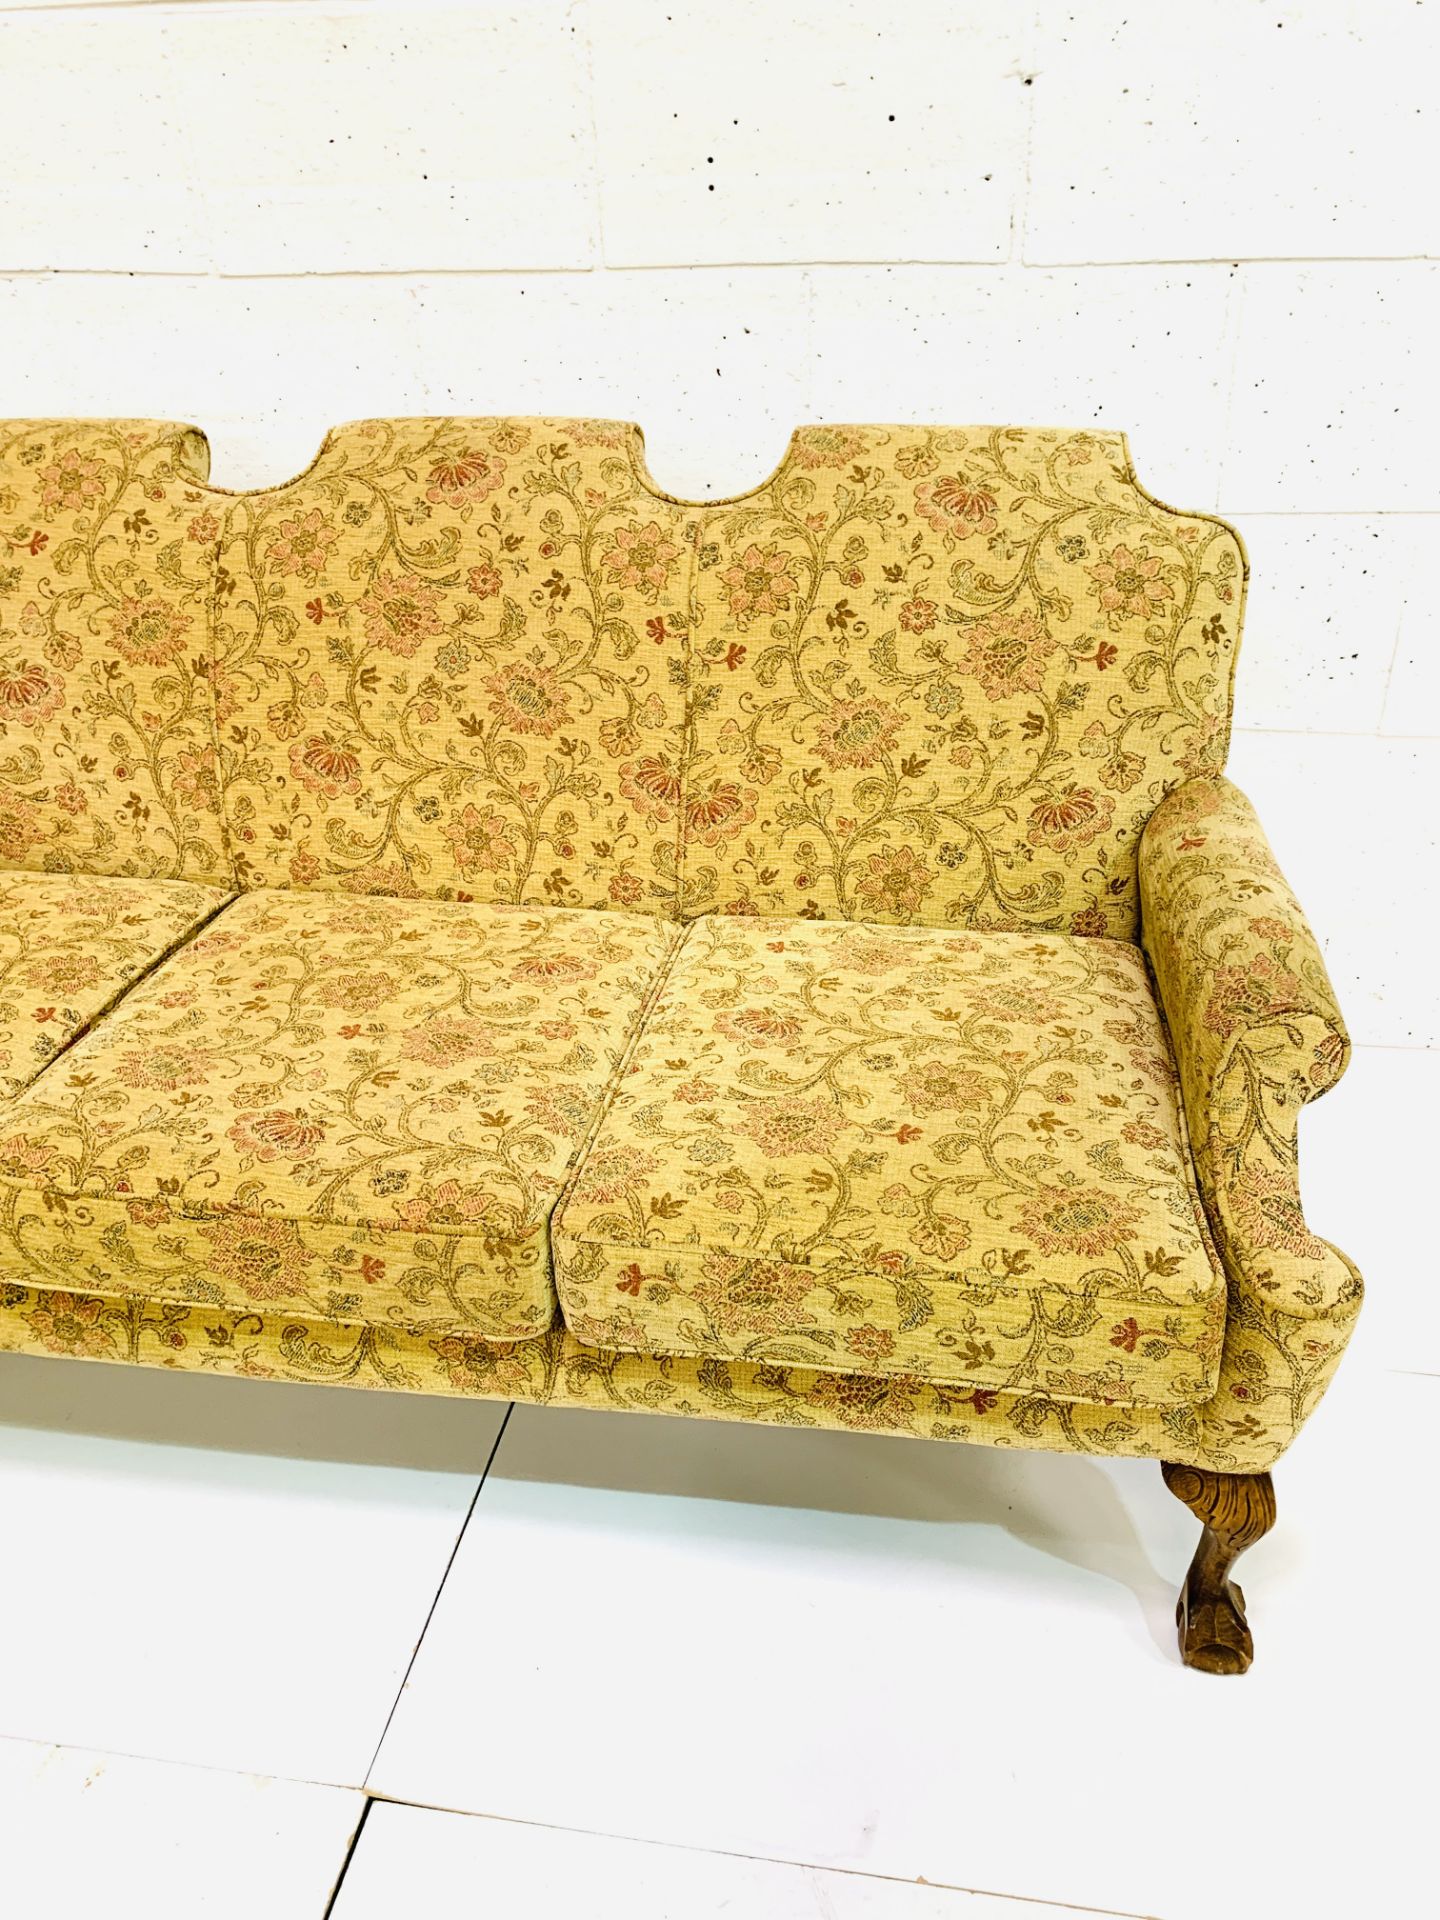 Queen Anne style settee - Image 2 of 5